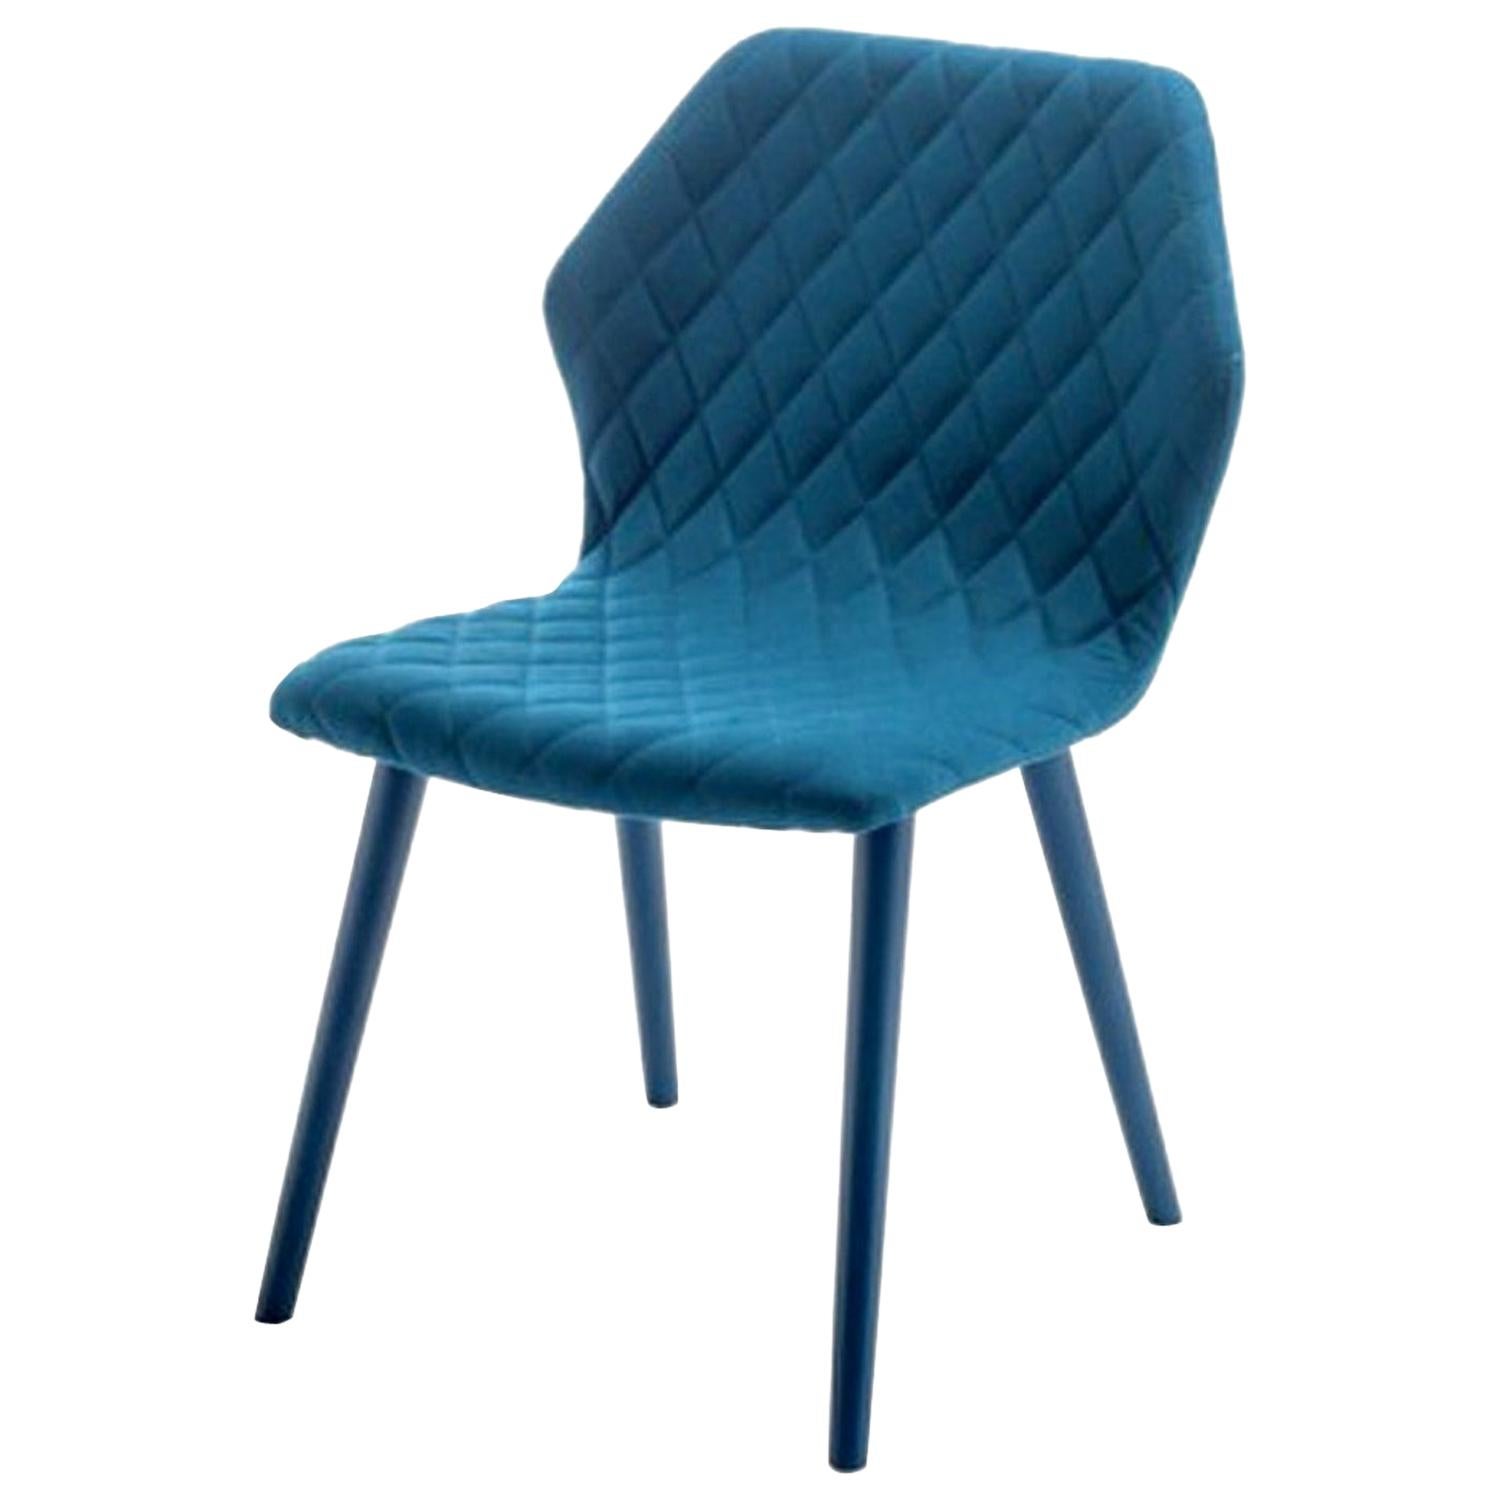 Ava Blue Leather Quilted Chair, Designed by Michael Schmidt, Made in Italy For Sale